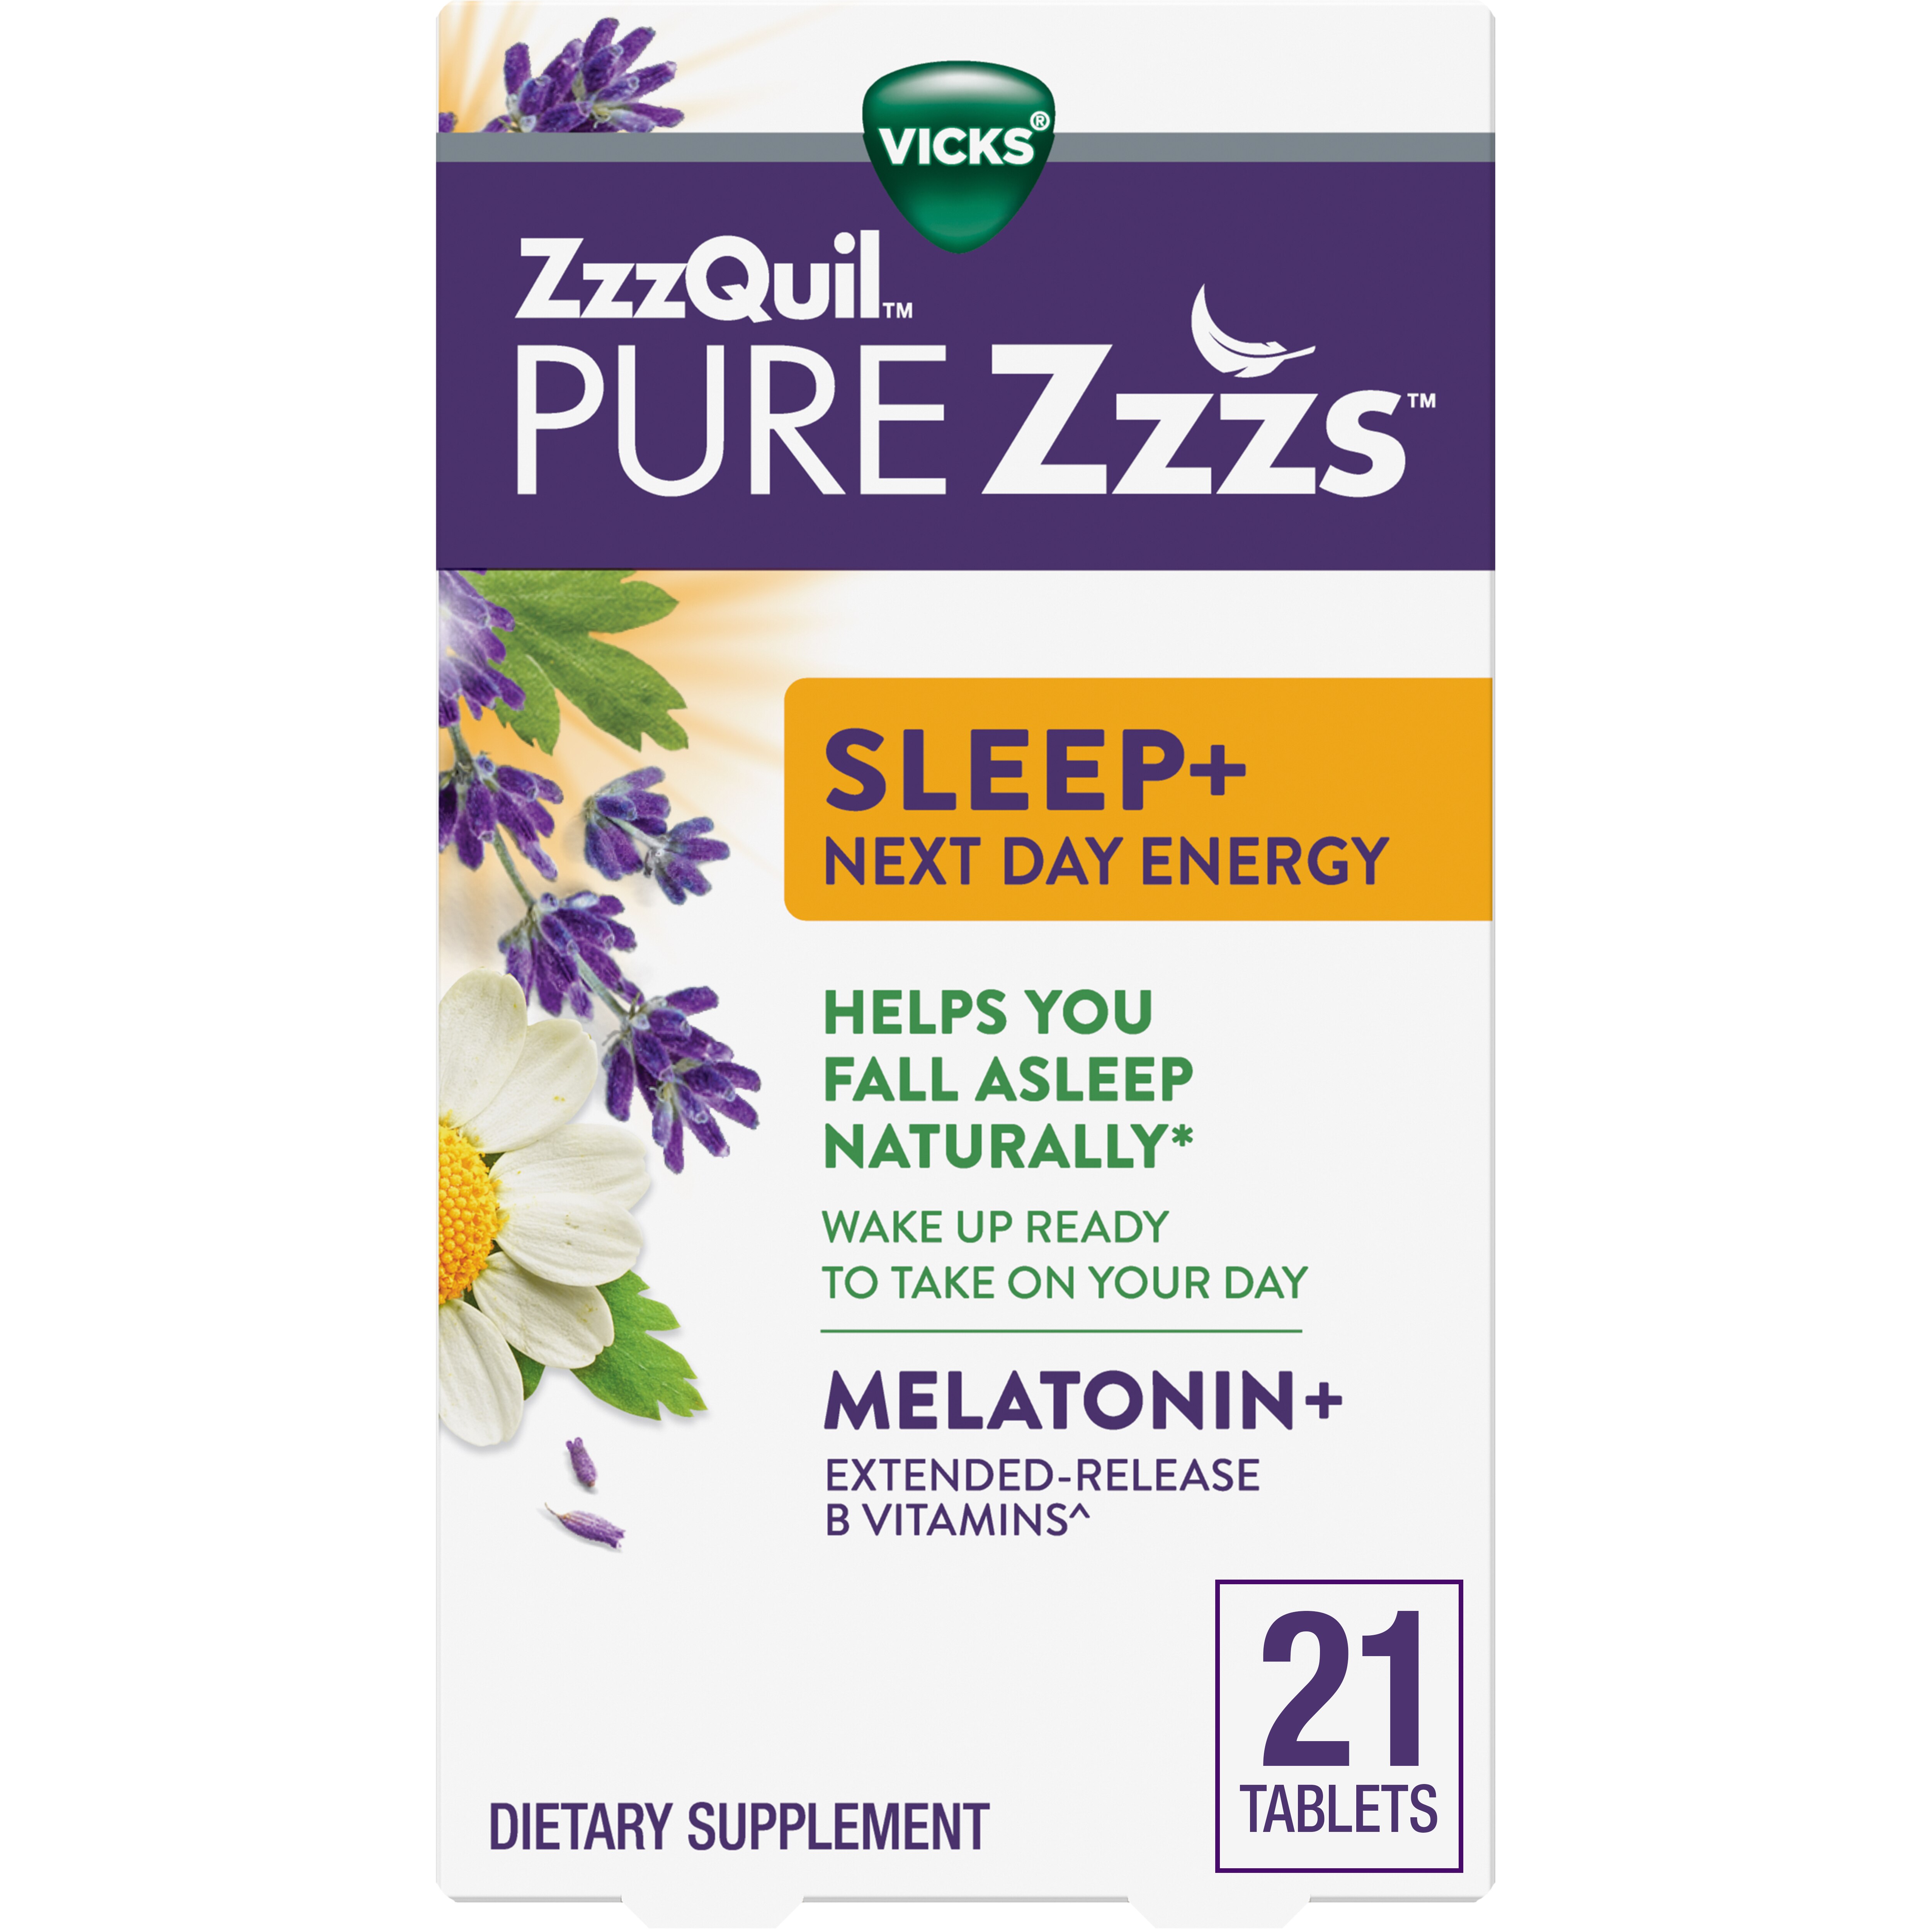 Vicks ZzzQuil PURE Zzzs Sleep+ Next Day Energy Extended Release Tablets